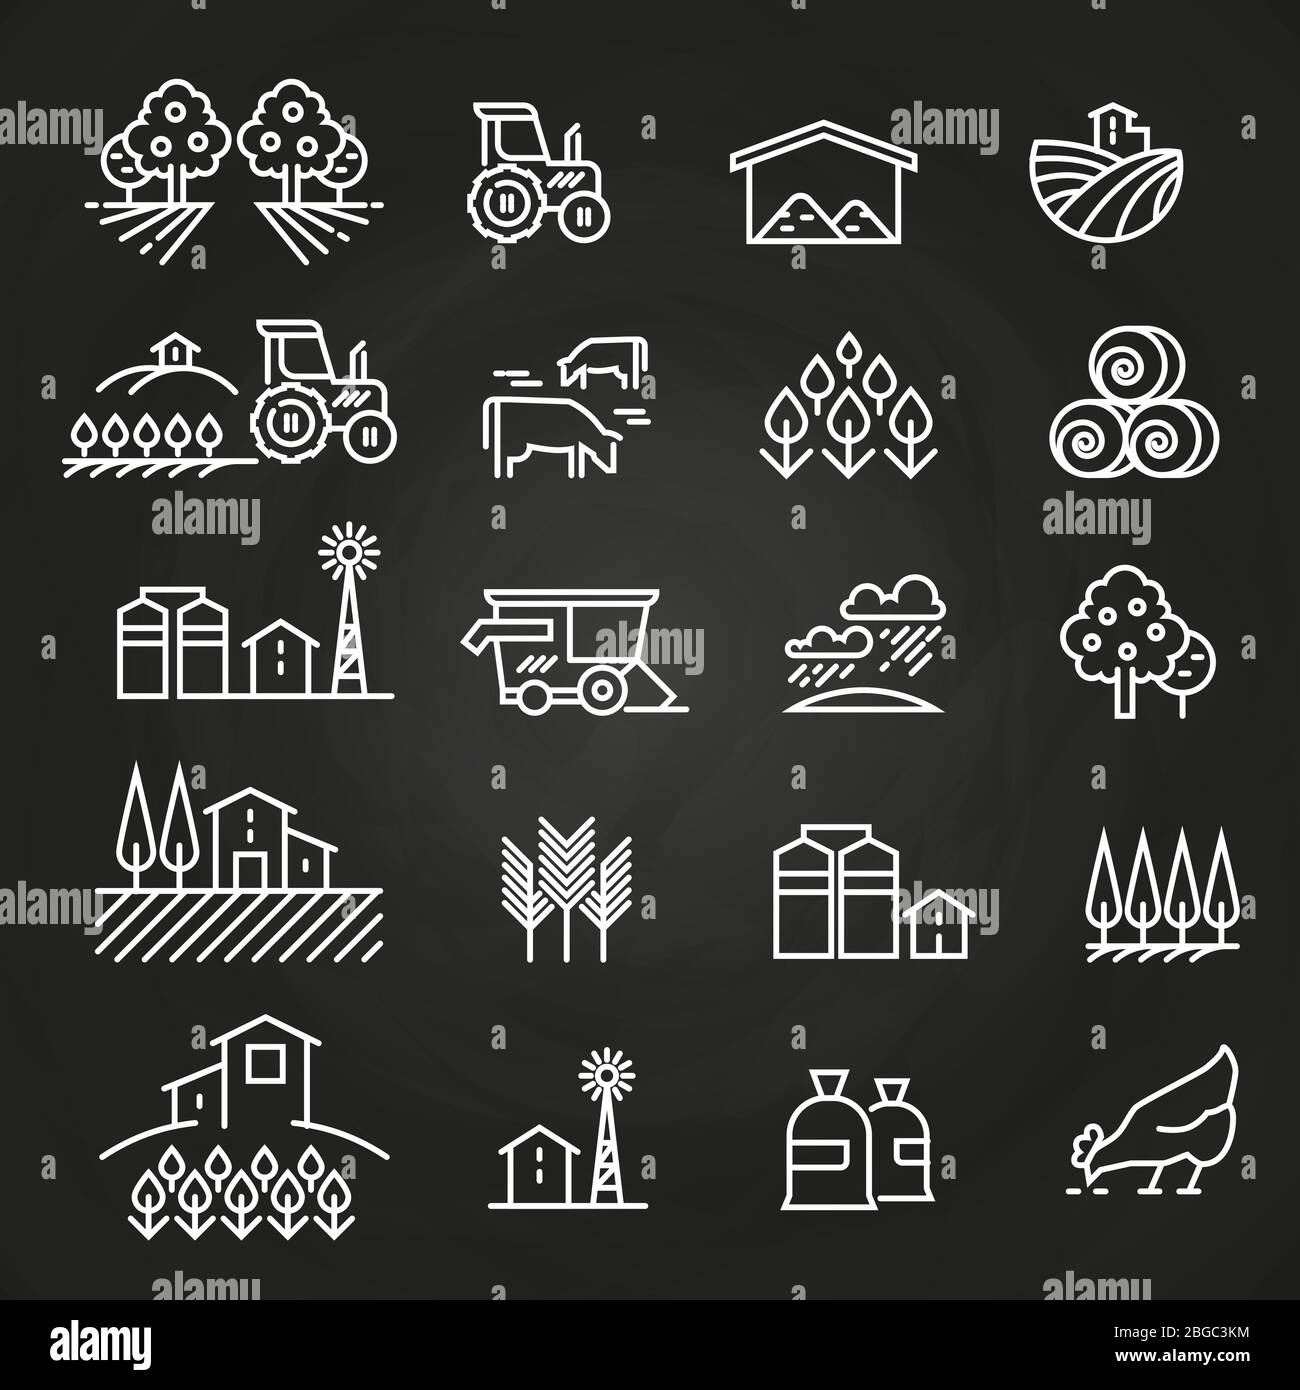 White farm icons and concepts on blackboard. Farm agriculture, village and tractor, field harvest illustration Stock Vector